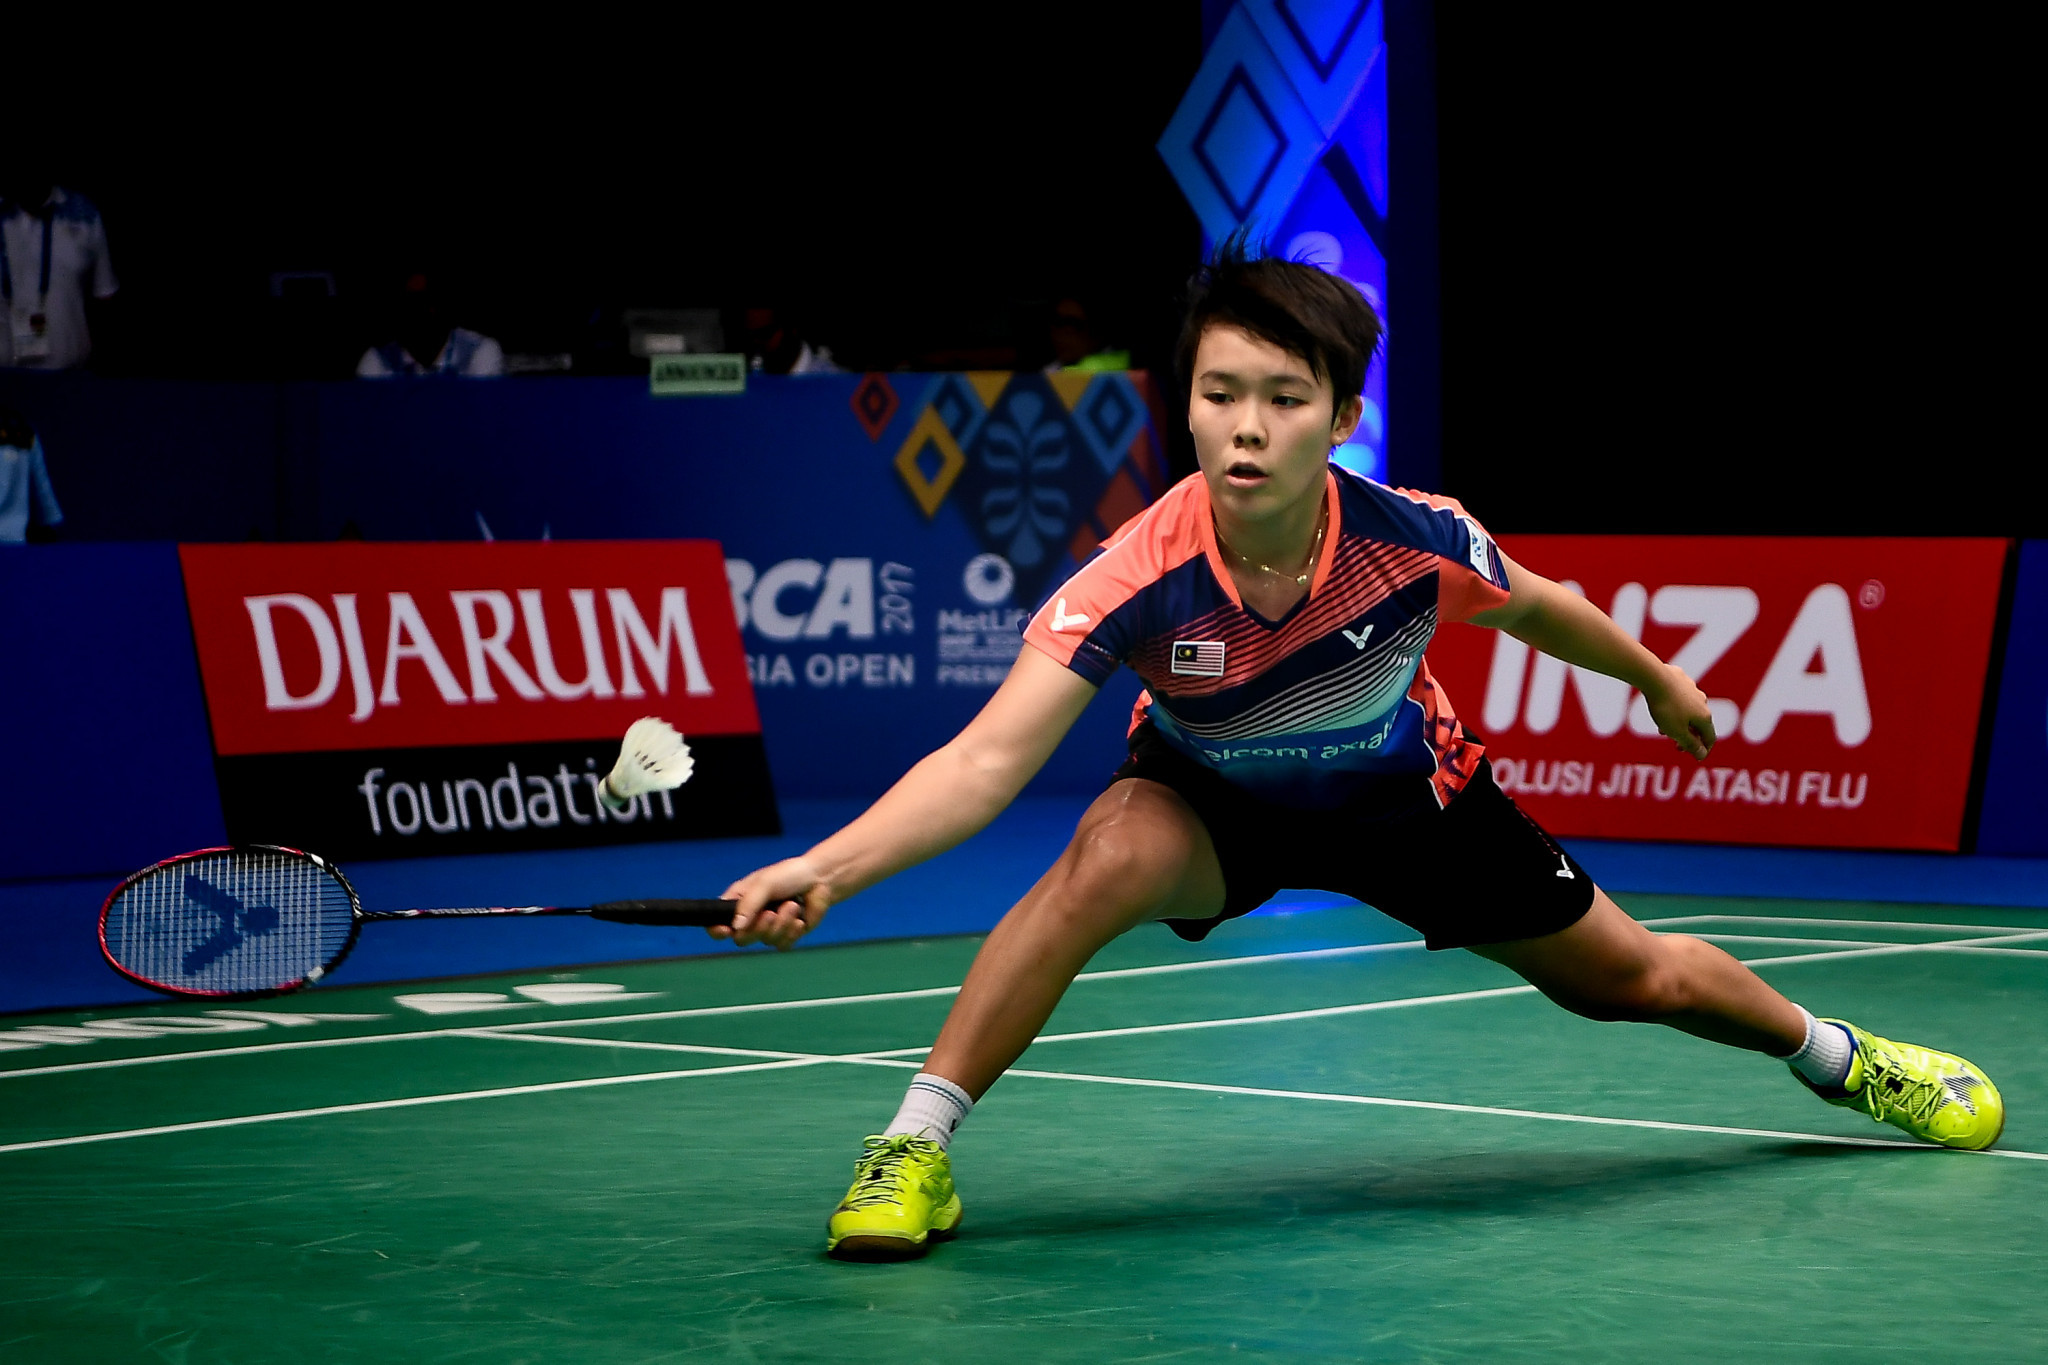 Goh to skip team event to focus on singles at upcoming BWF World Junior Championships